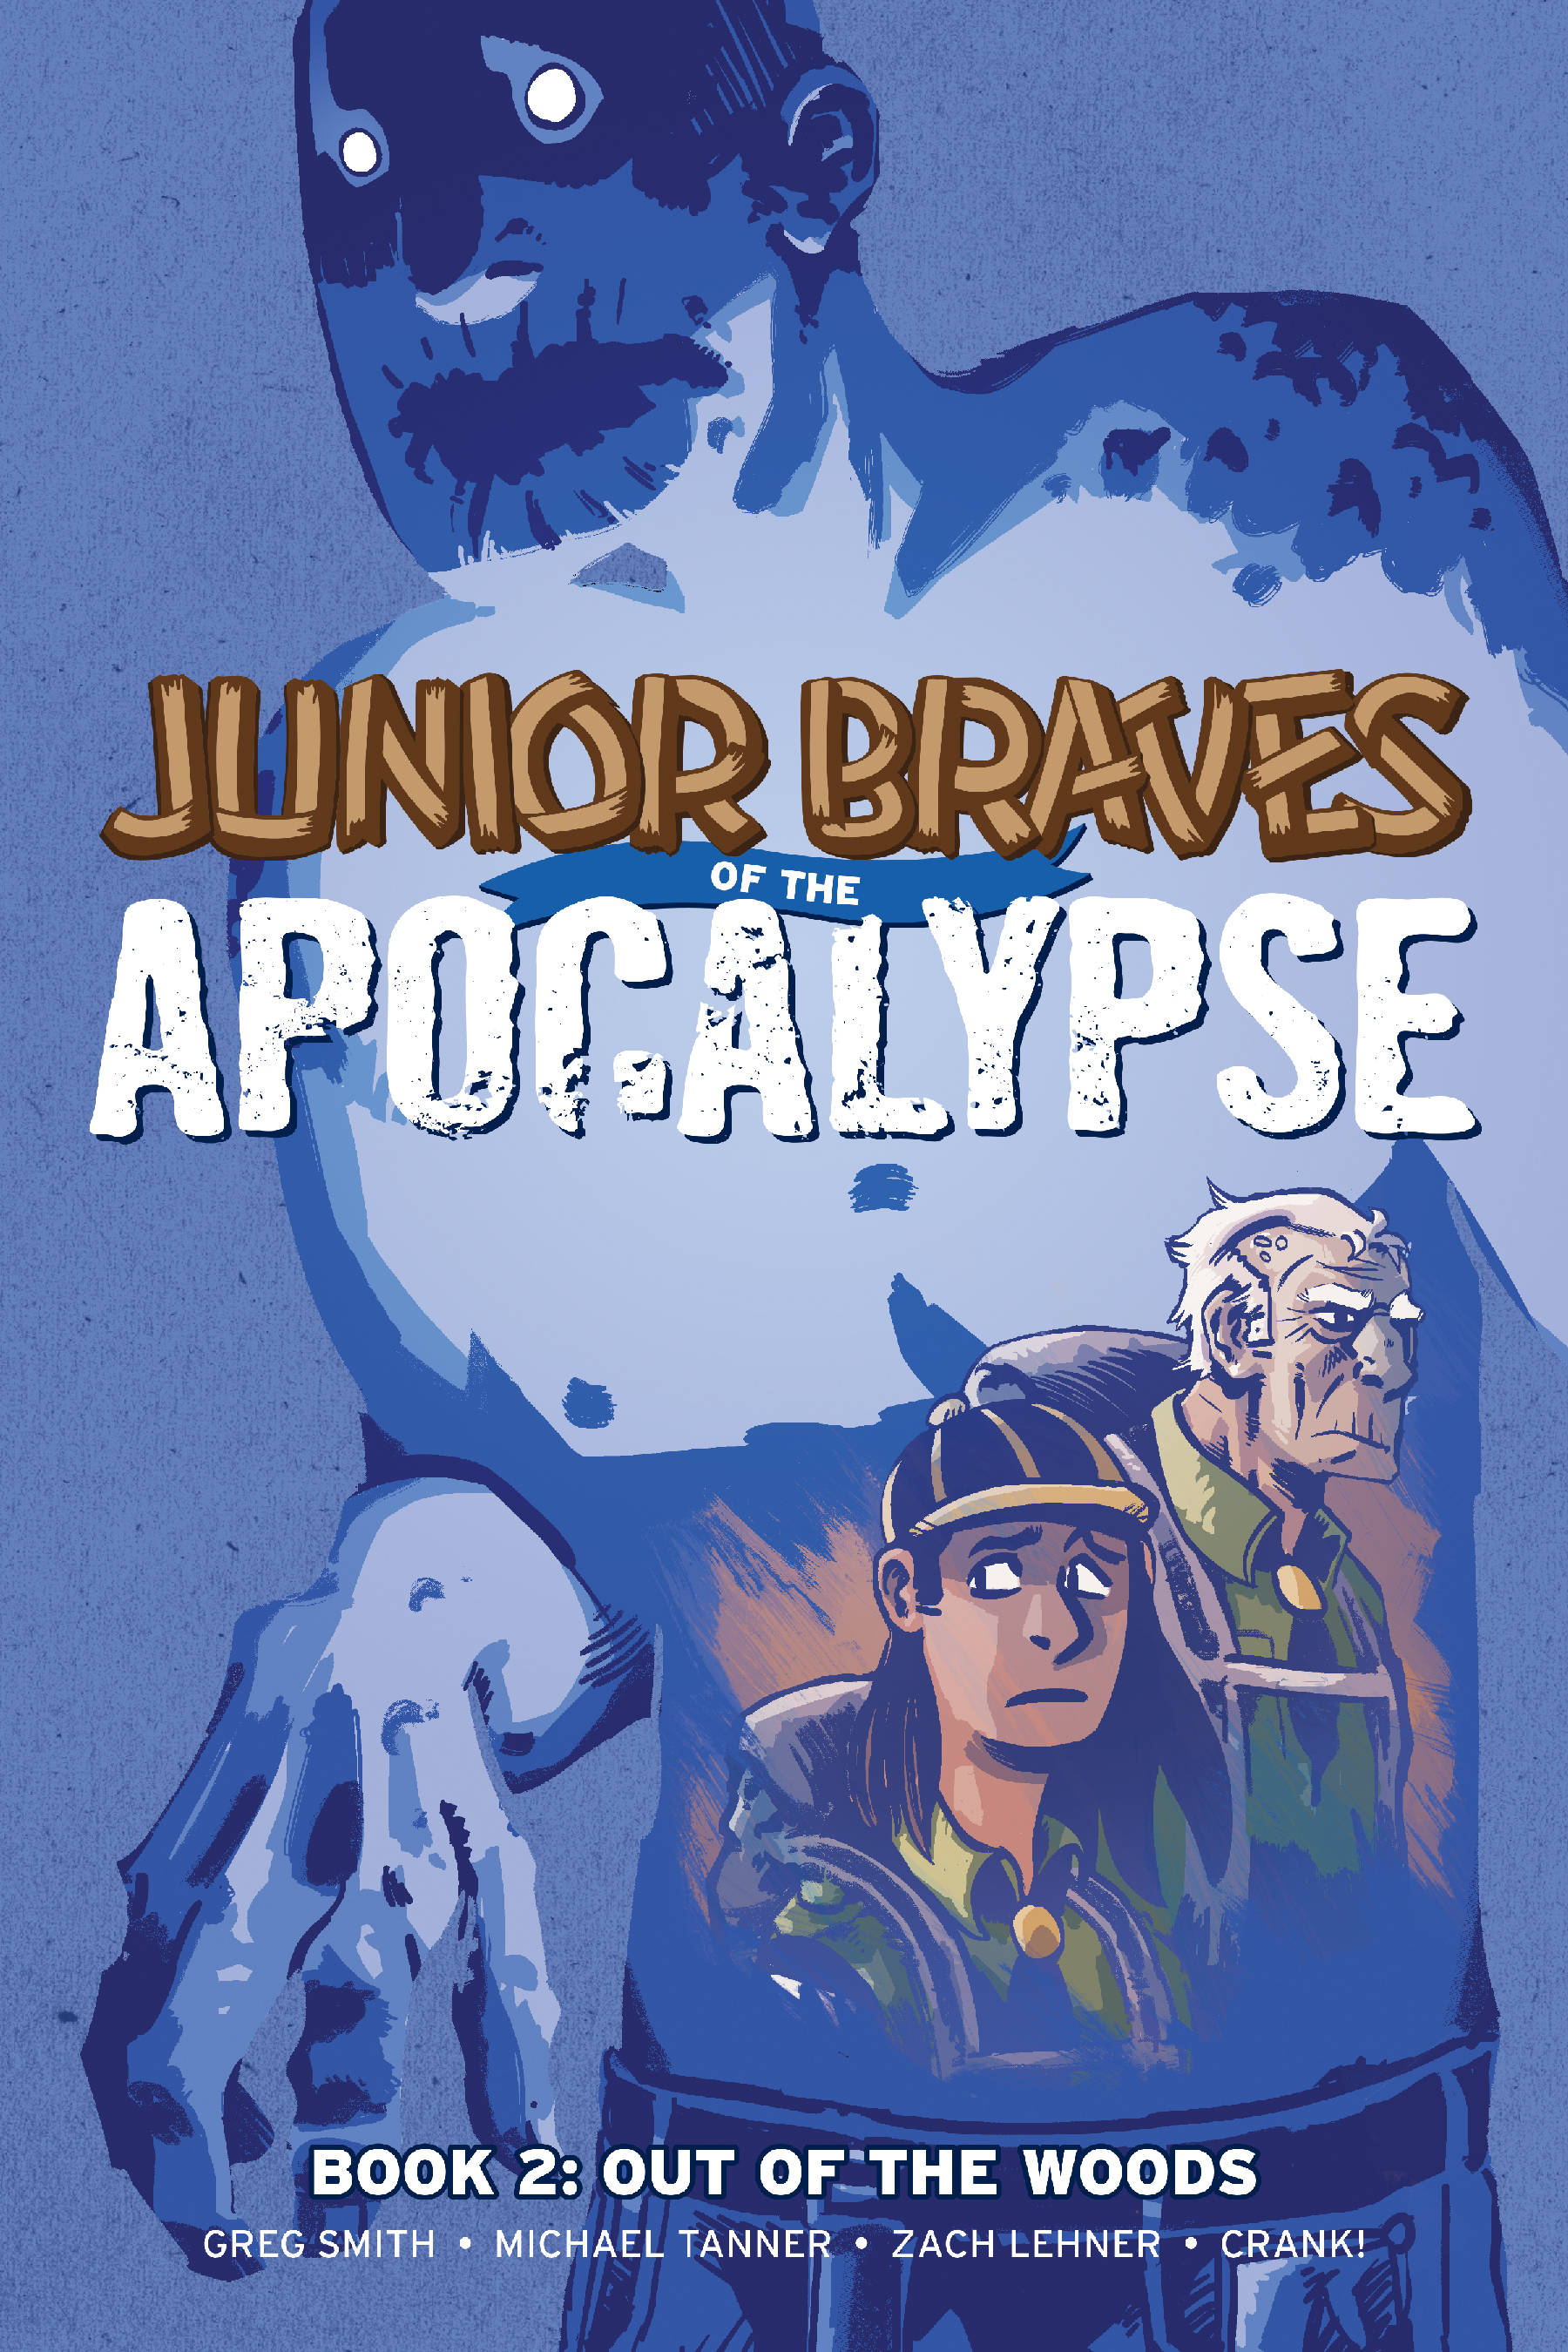 Junior Braves of the Apocalypse Graphic Novel Volume 2 Out of Woods